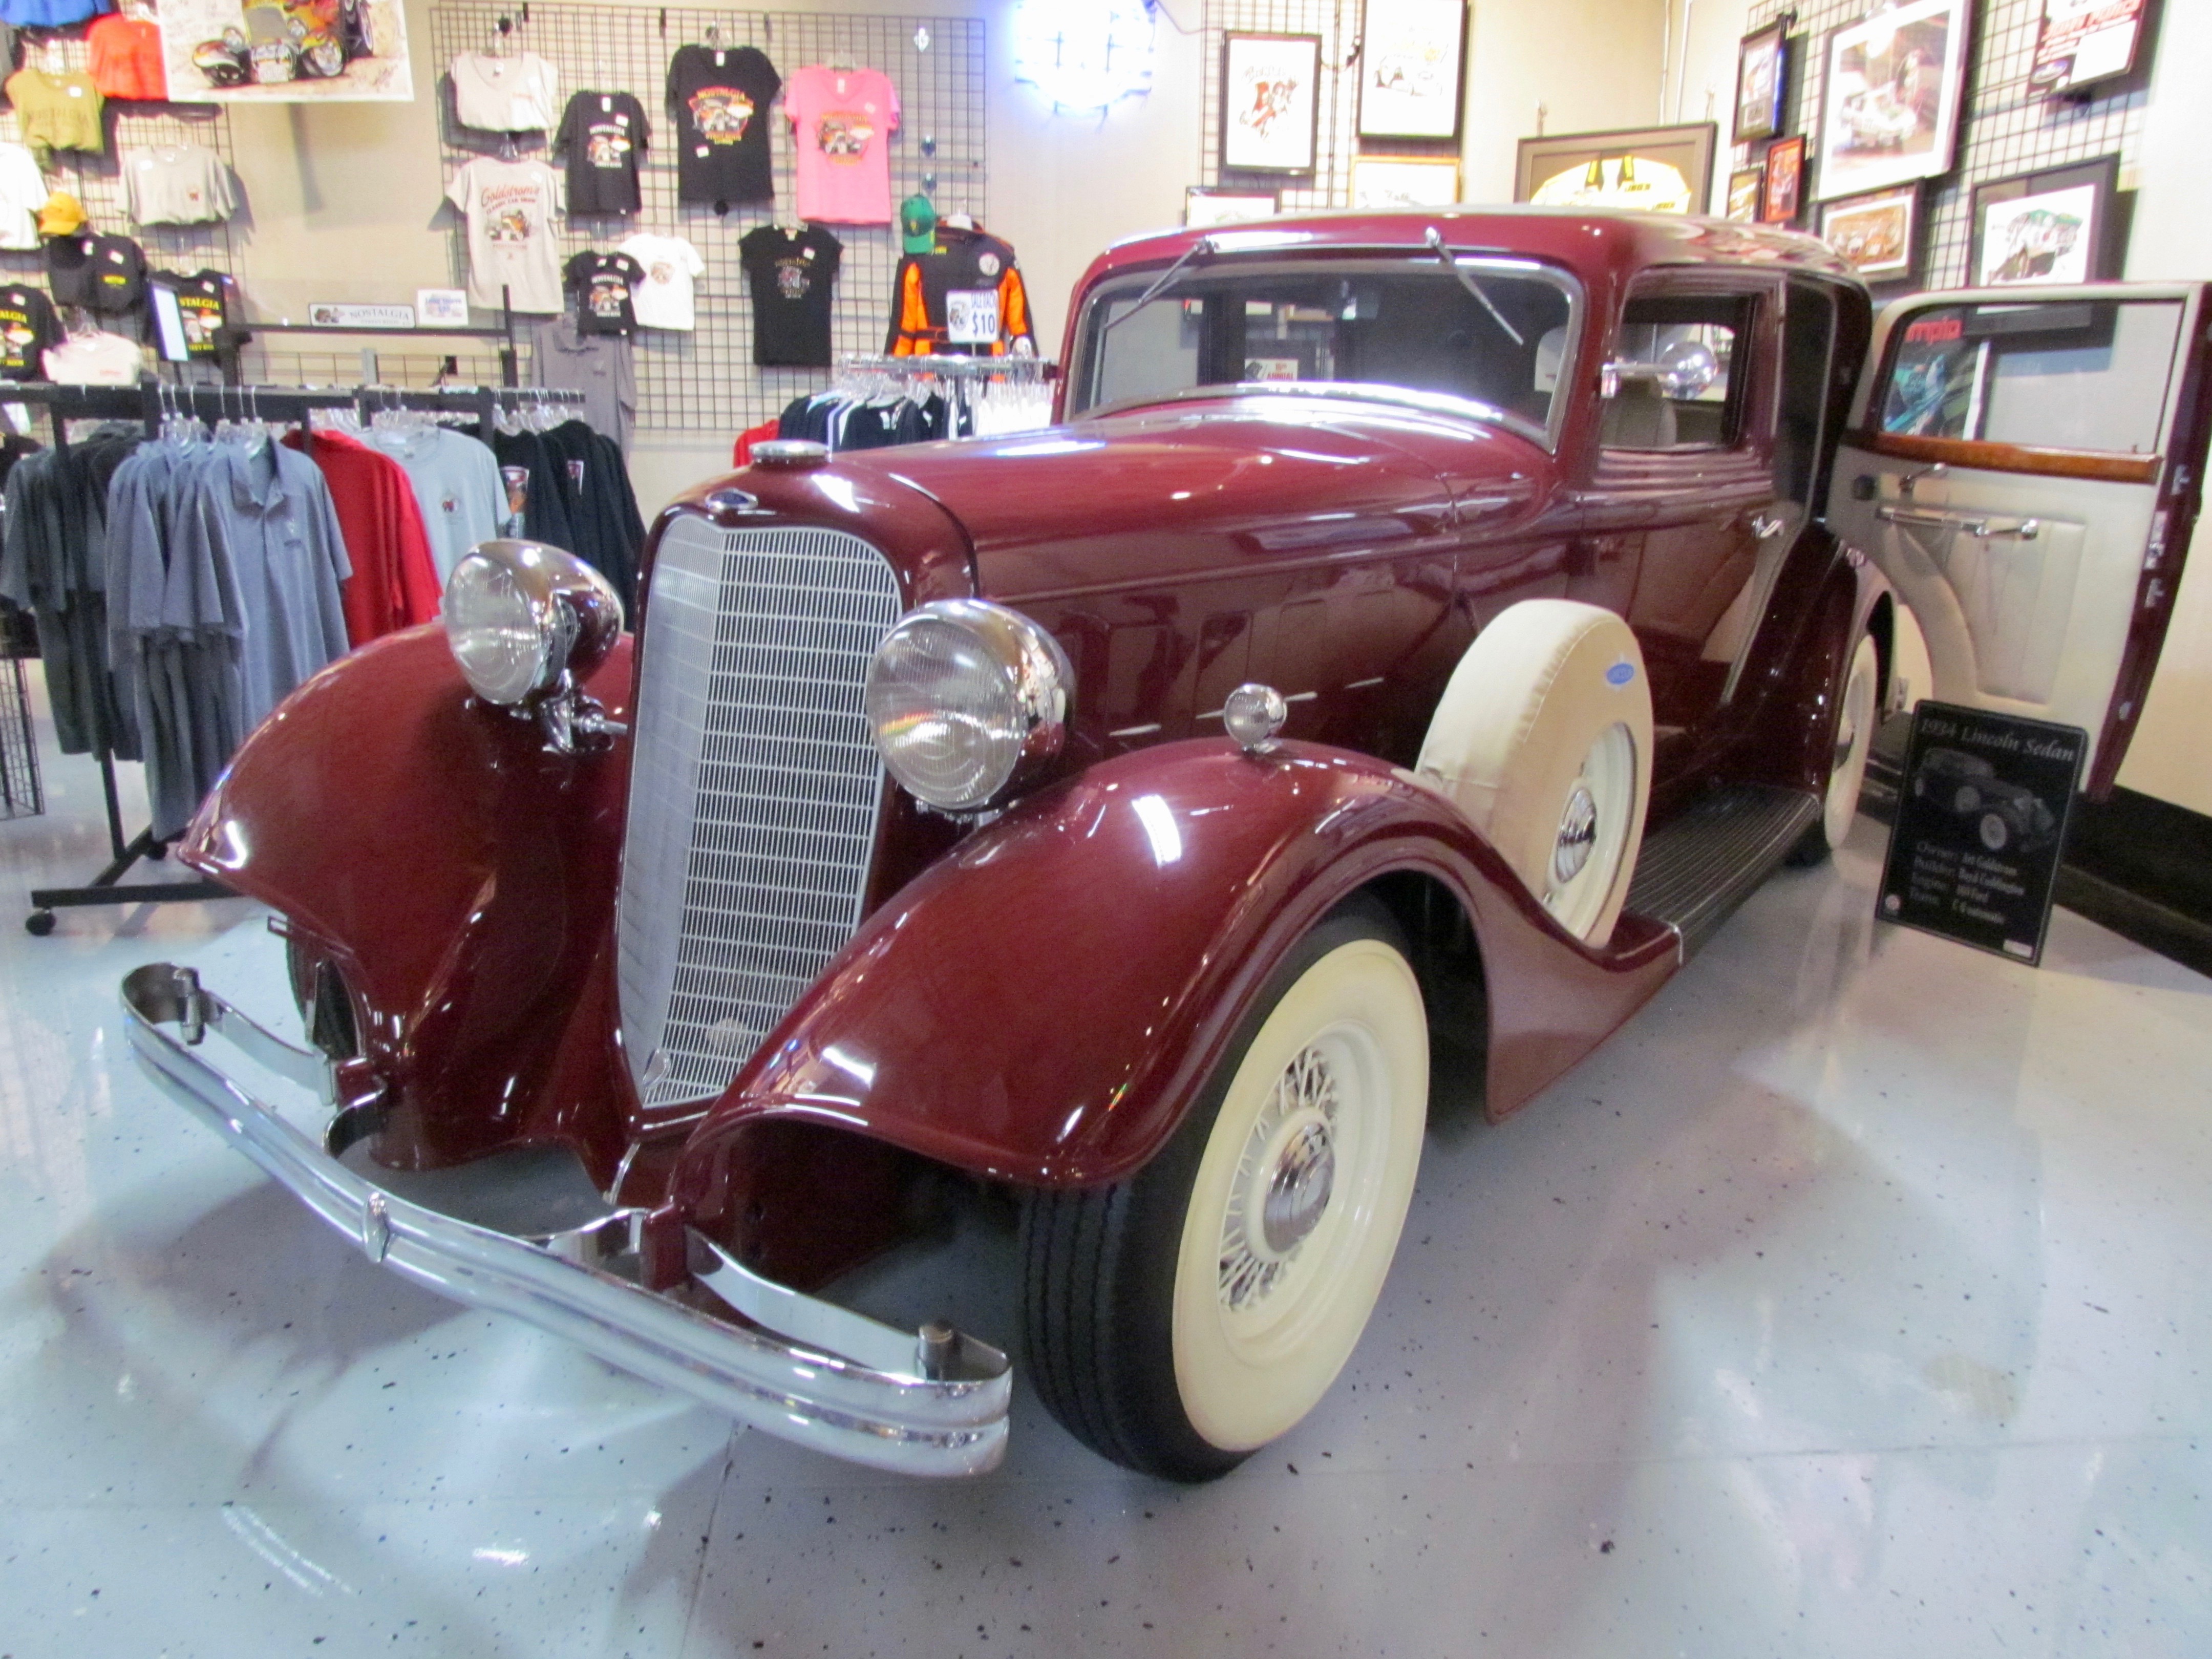 Nostalgia, Nostalgia extends well beyond street rods at this museum, ClassicCars.com Journal